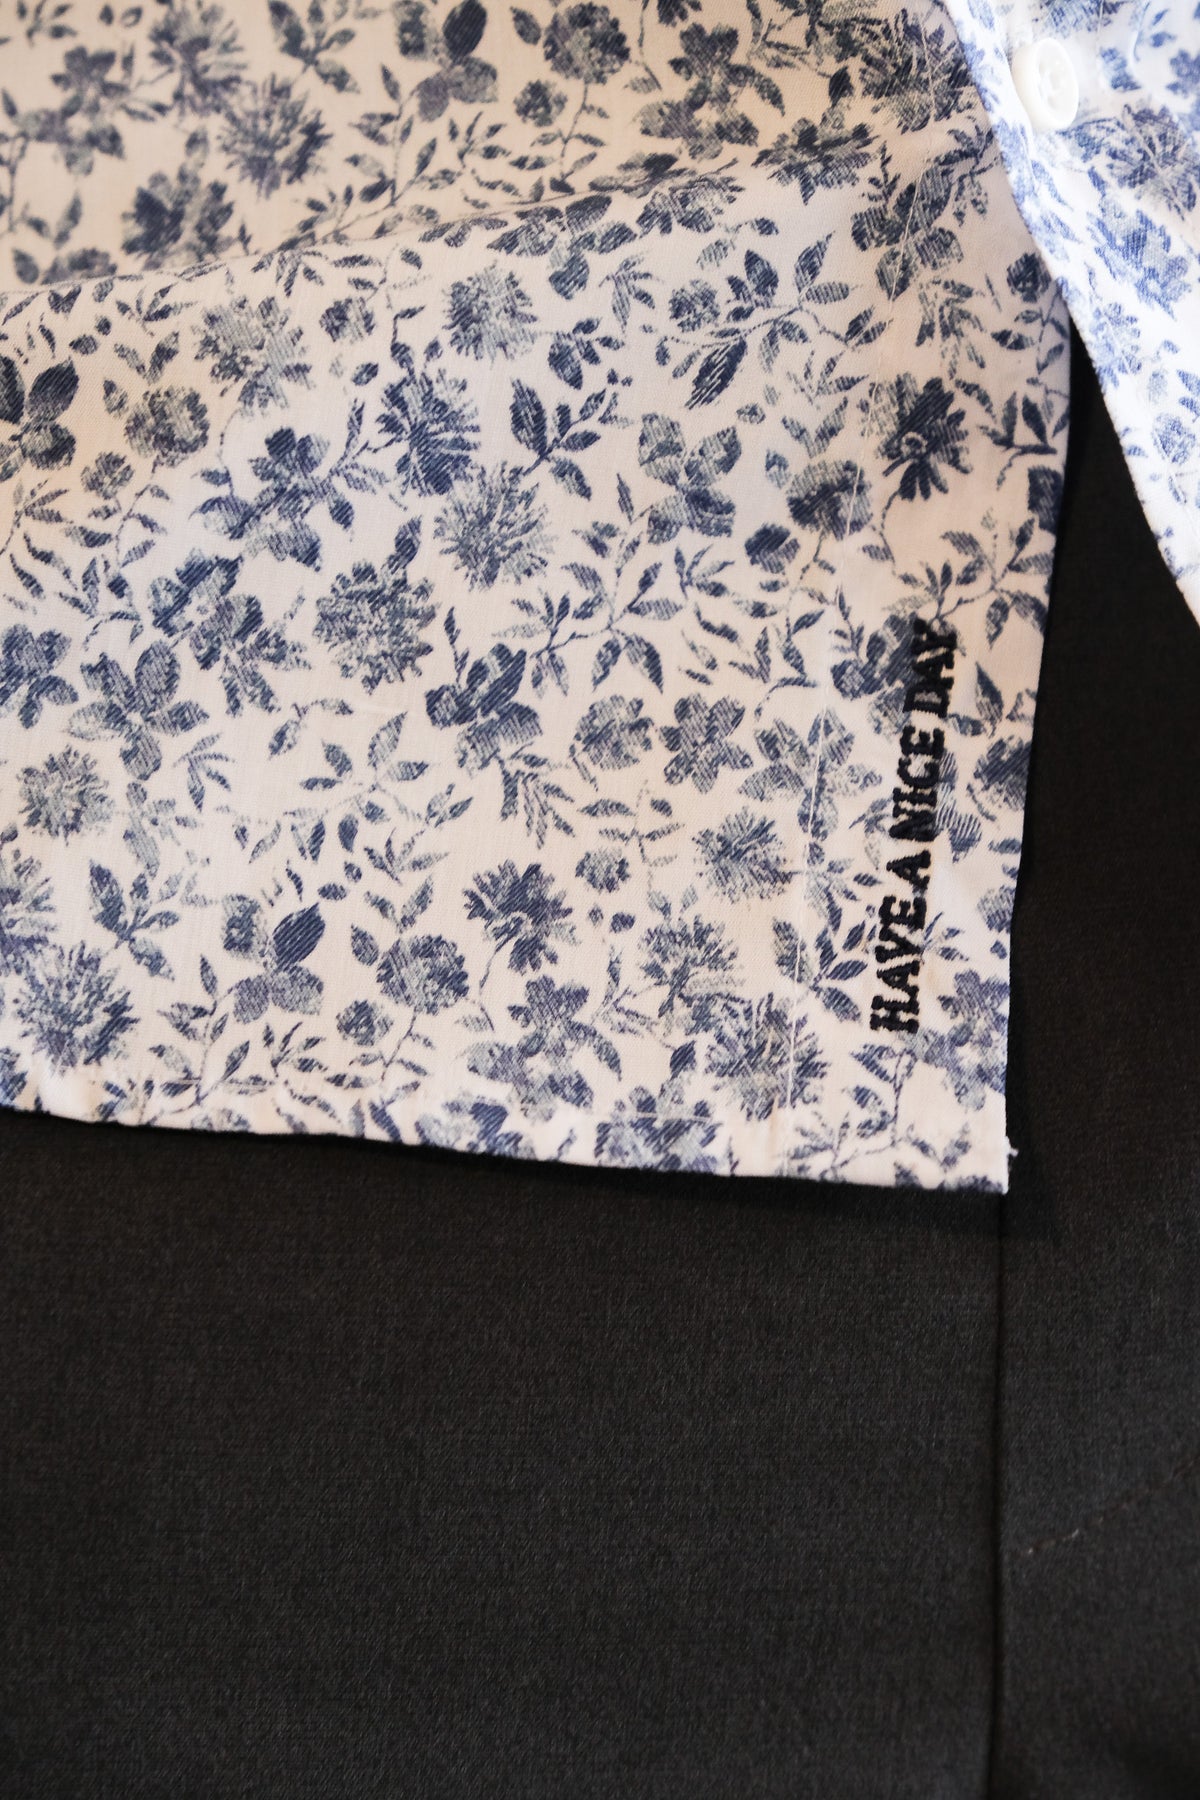 Printed casual shirt with floral pattern in white/blue (Art. 2104-C)